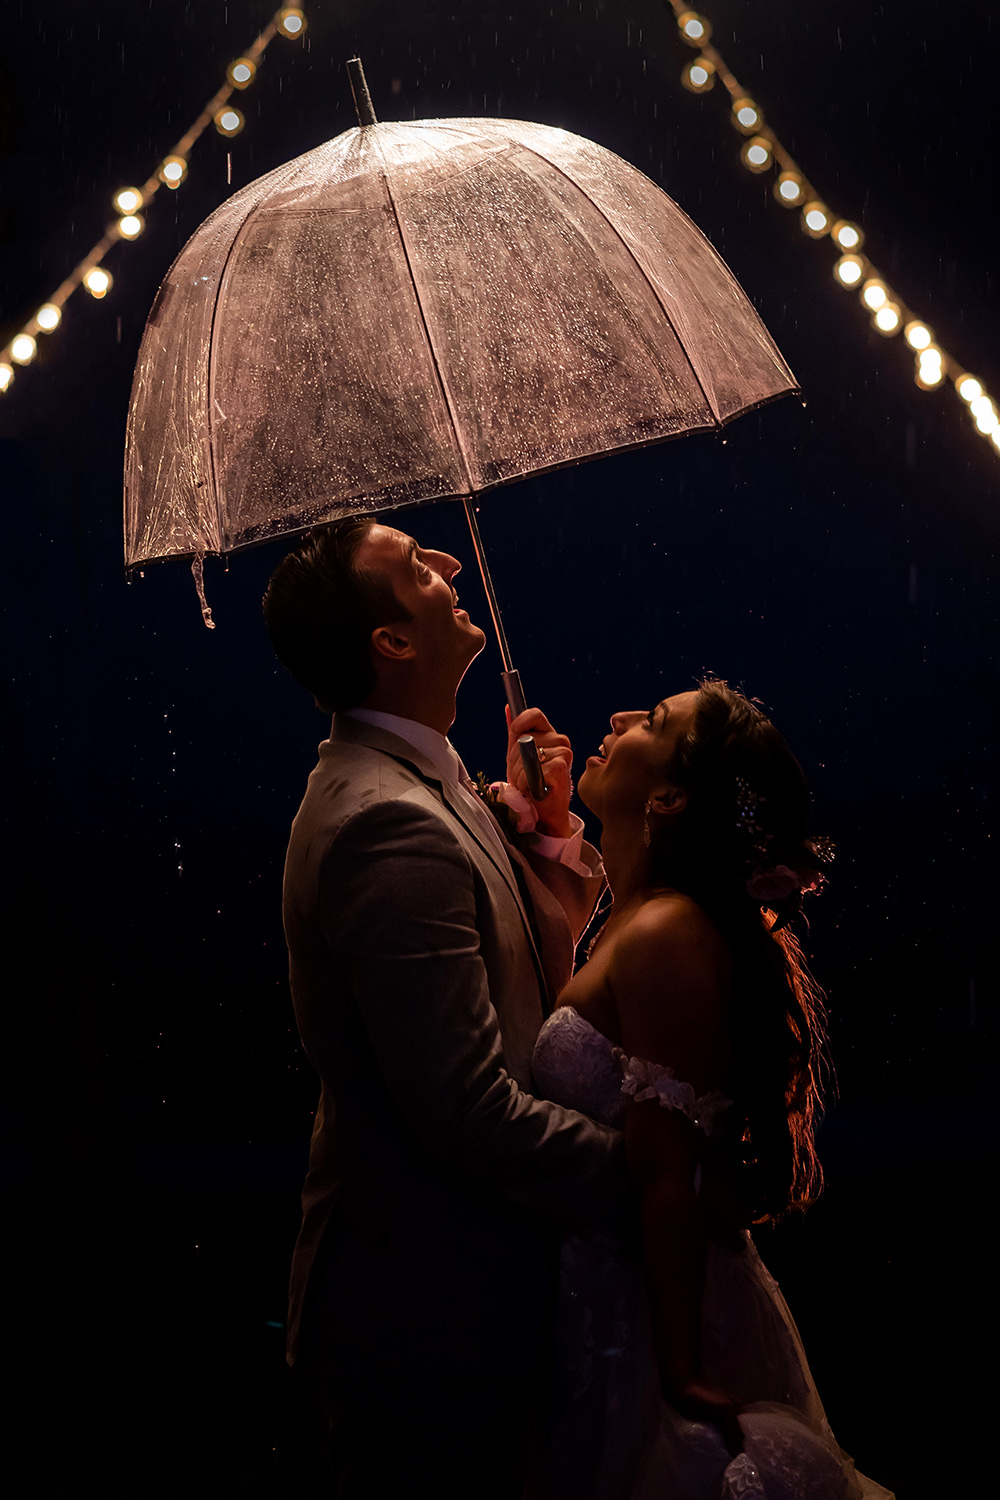 When it rains, make a wedding portrait with the bride and groom.